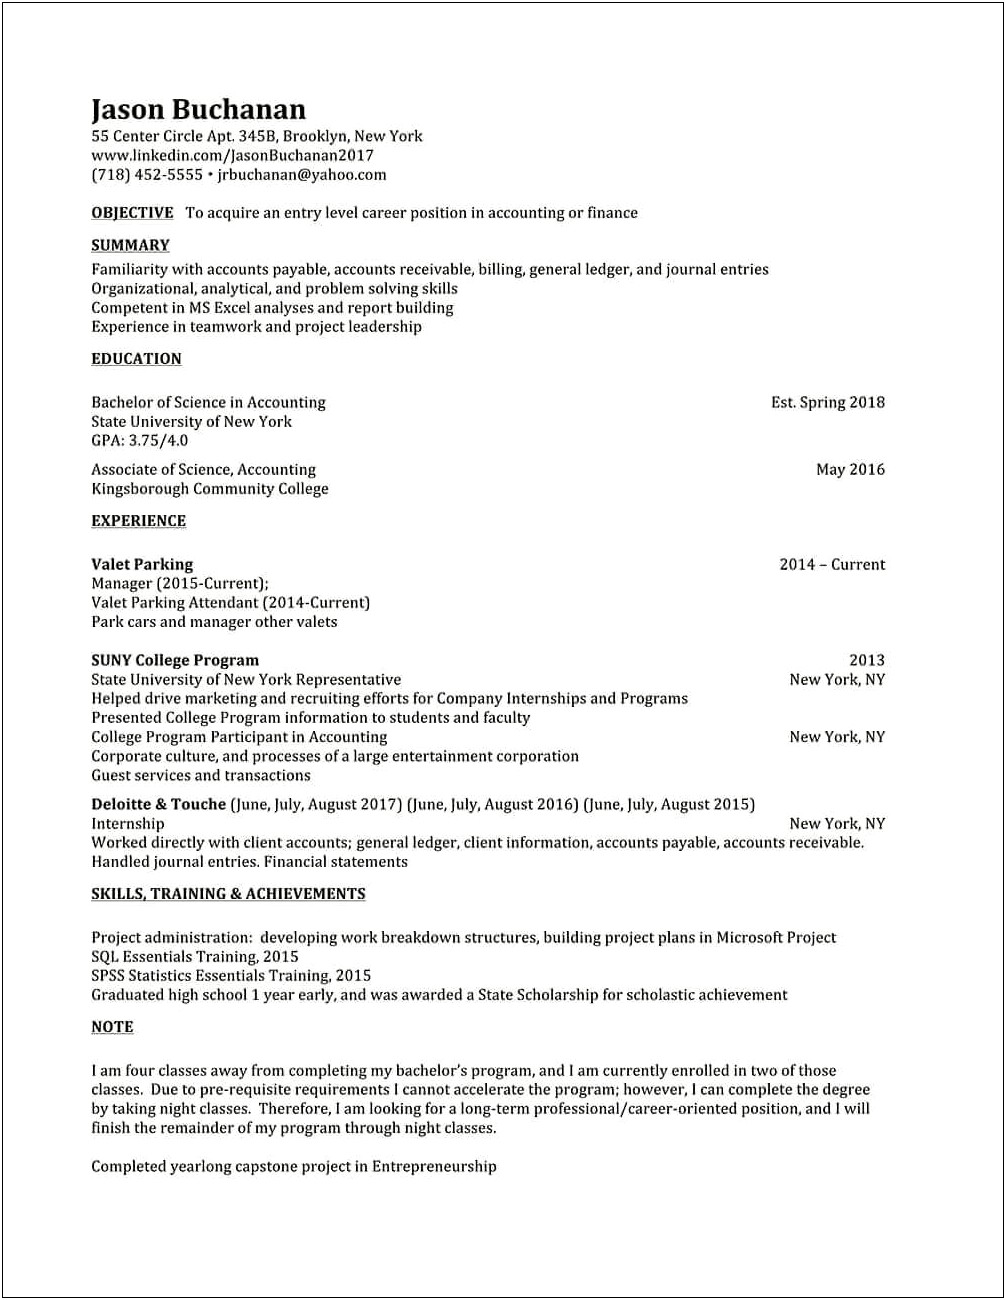 Resume With Only One Previous Job